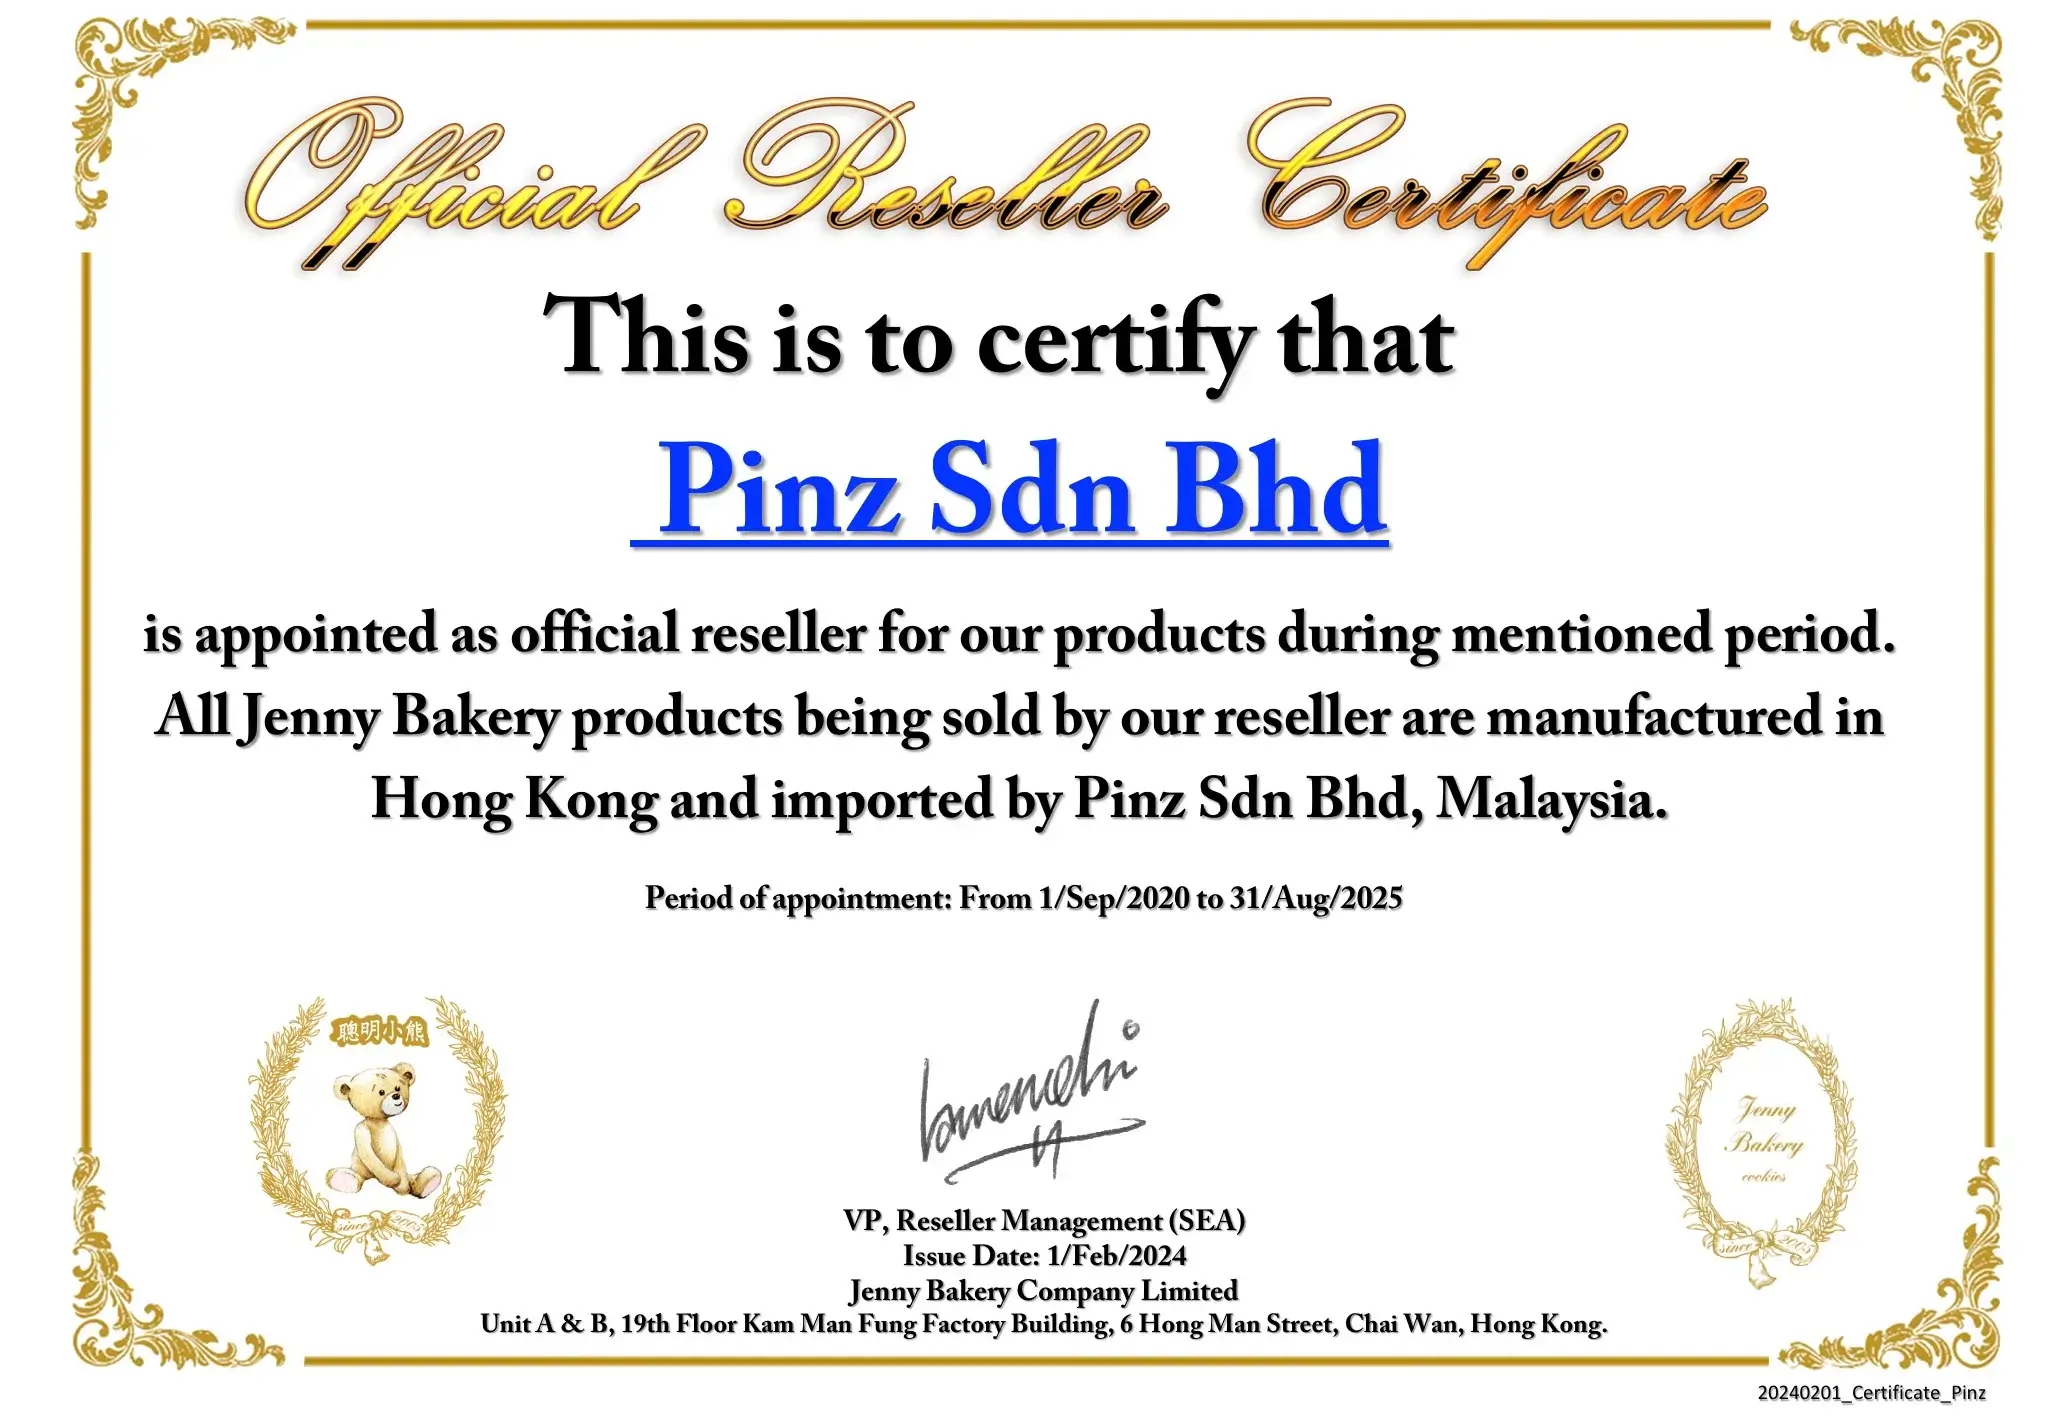 Official Reseller CertificatesThis is to Certify Pinz Sdn Bhd is appointed as official reseller for our products during mentioned period. All Jenny Bakery products being sold by our reseller are manufactured in Hong Kong and imported by Pinz Sdn Bhd, Malaysia. Period of appointment: From 1/Sep/2020 to 31/Aug/2025 VP, Reseller Management (SEA) Issue Date: 1/Feb/2024 Jenny Bakery Company Limited Unit A & B, 19th Floor Kam Man Fung Factory Building, 6 Hong Man Street, Chai Wan, Hong Kong.